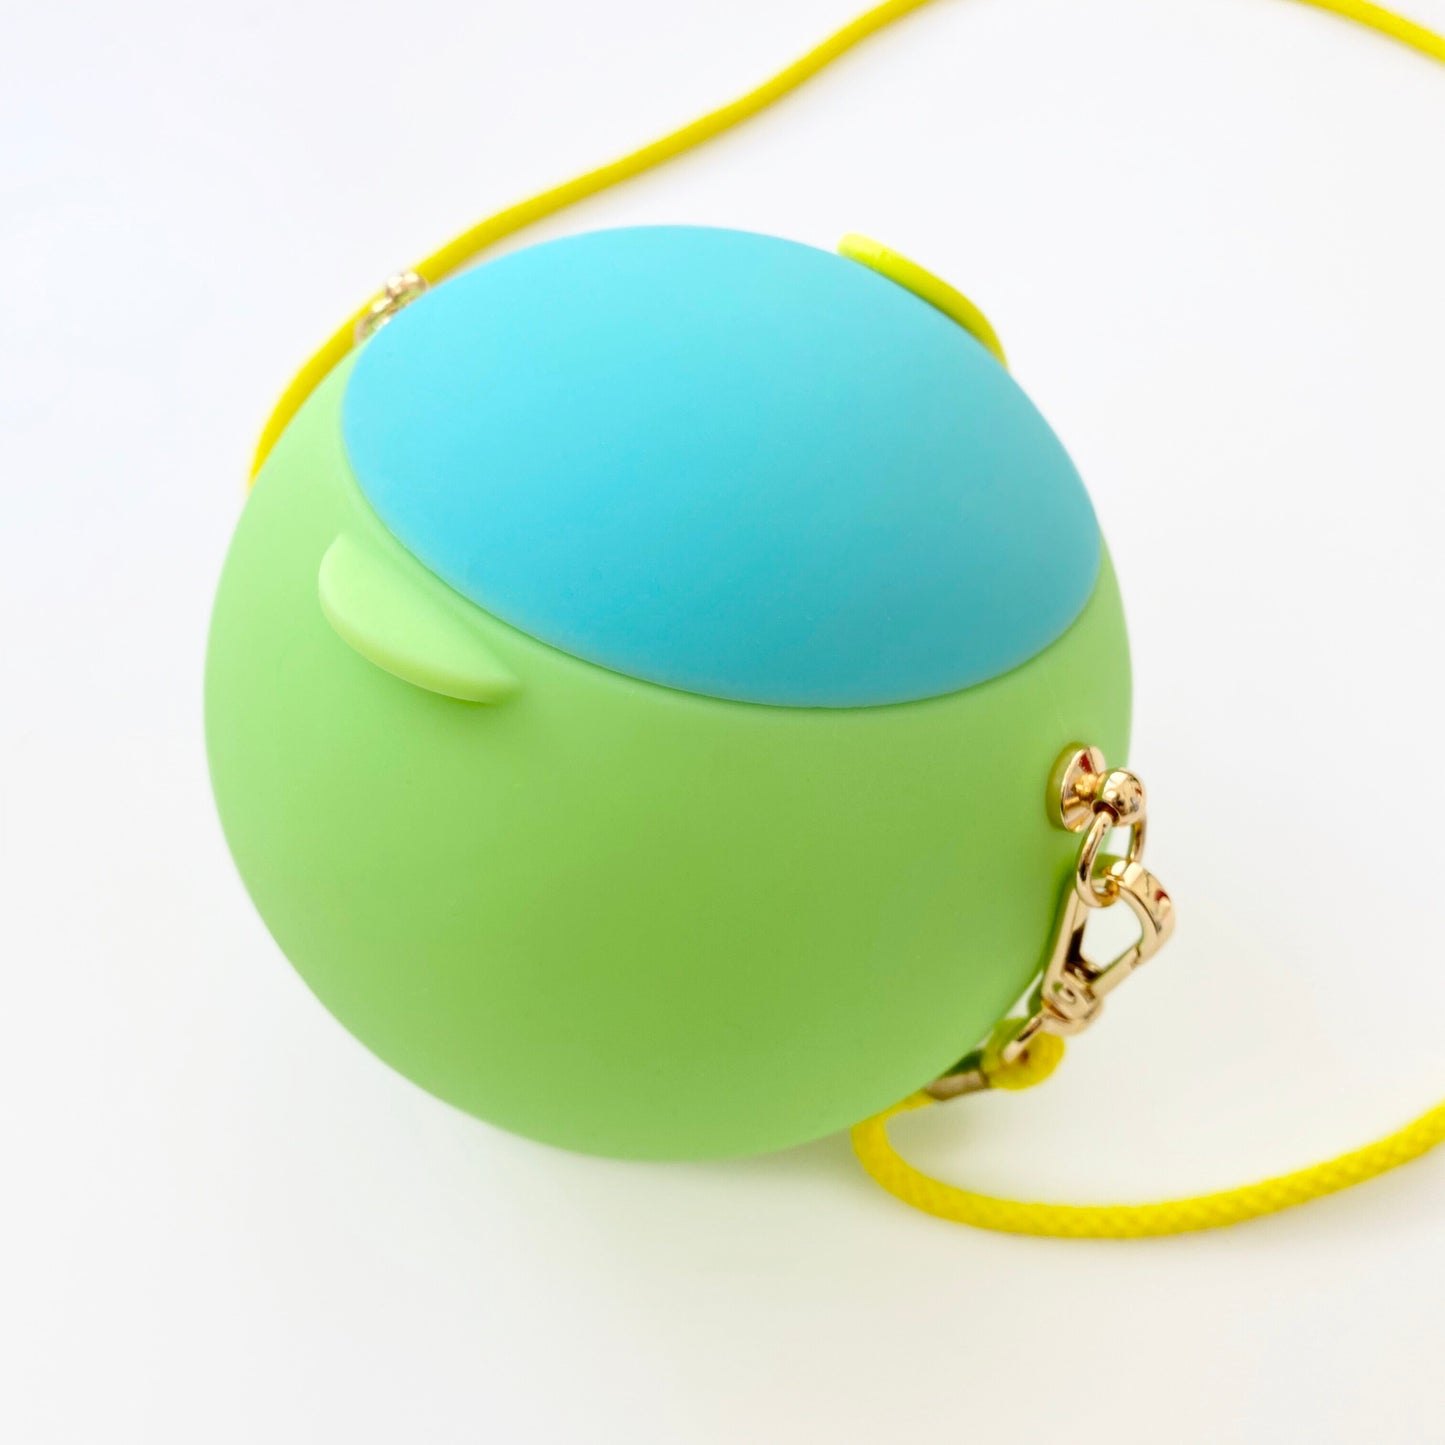 Silicone Bouncy Purse (Blue/Green)